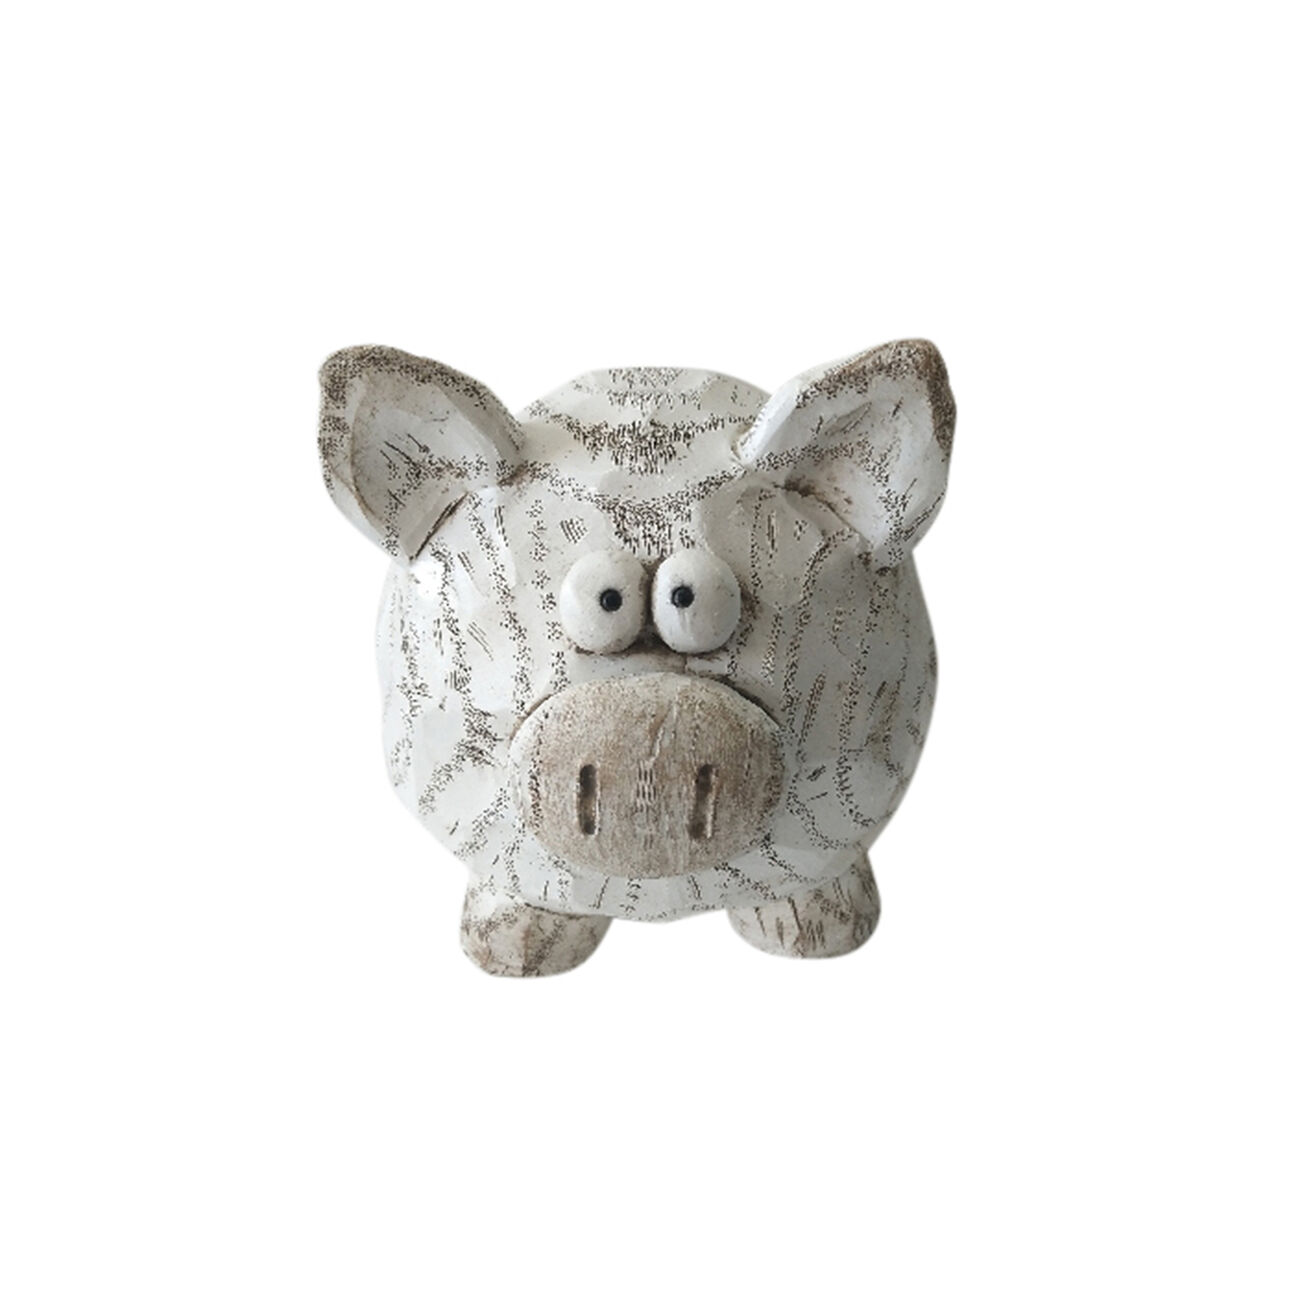 decorative Polyresin Pig Figurine with Textured Details, White and Brown